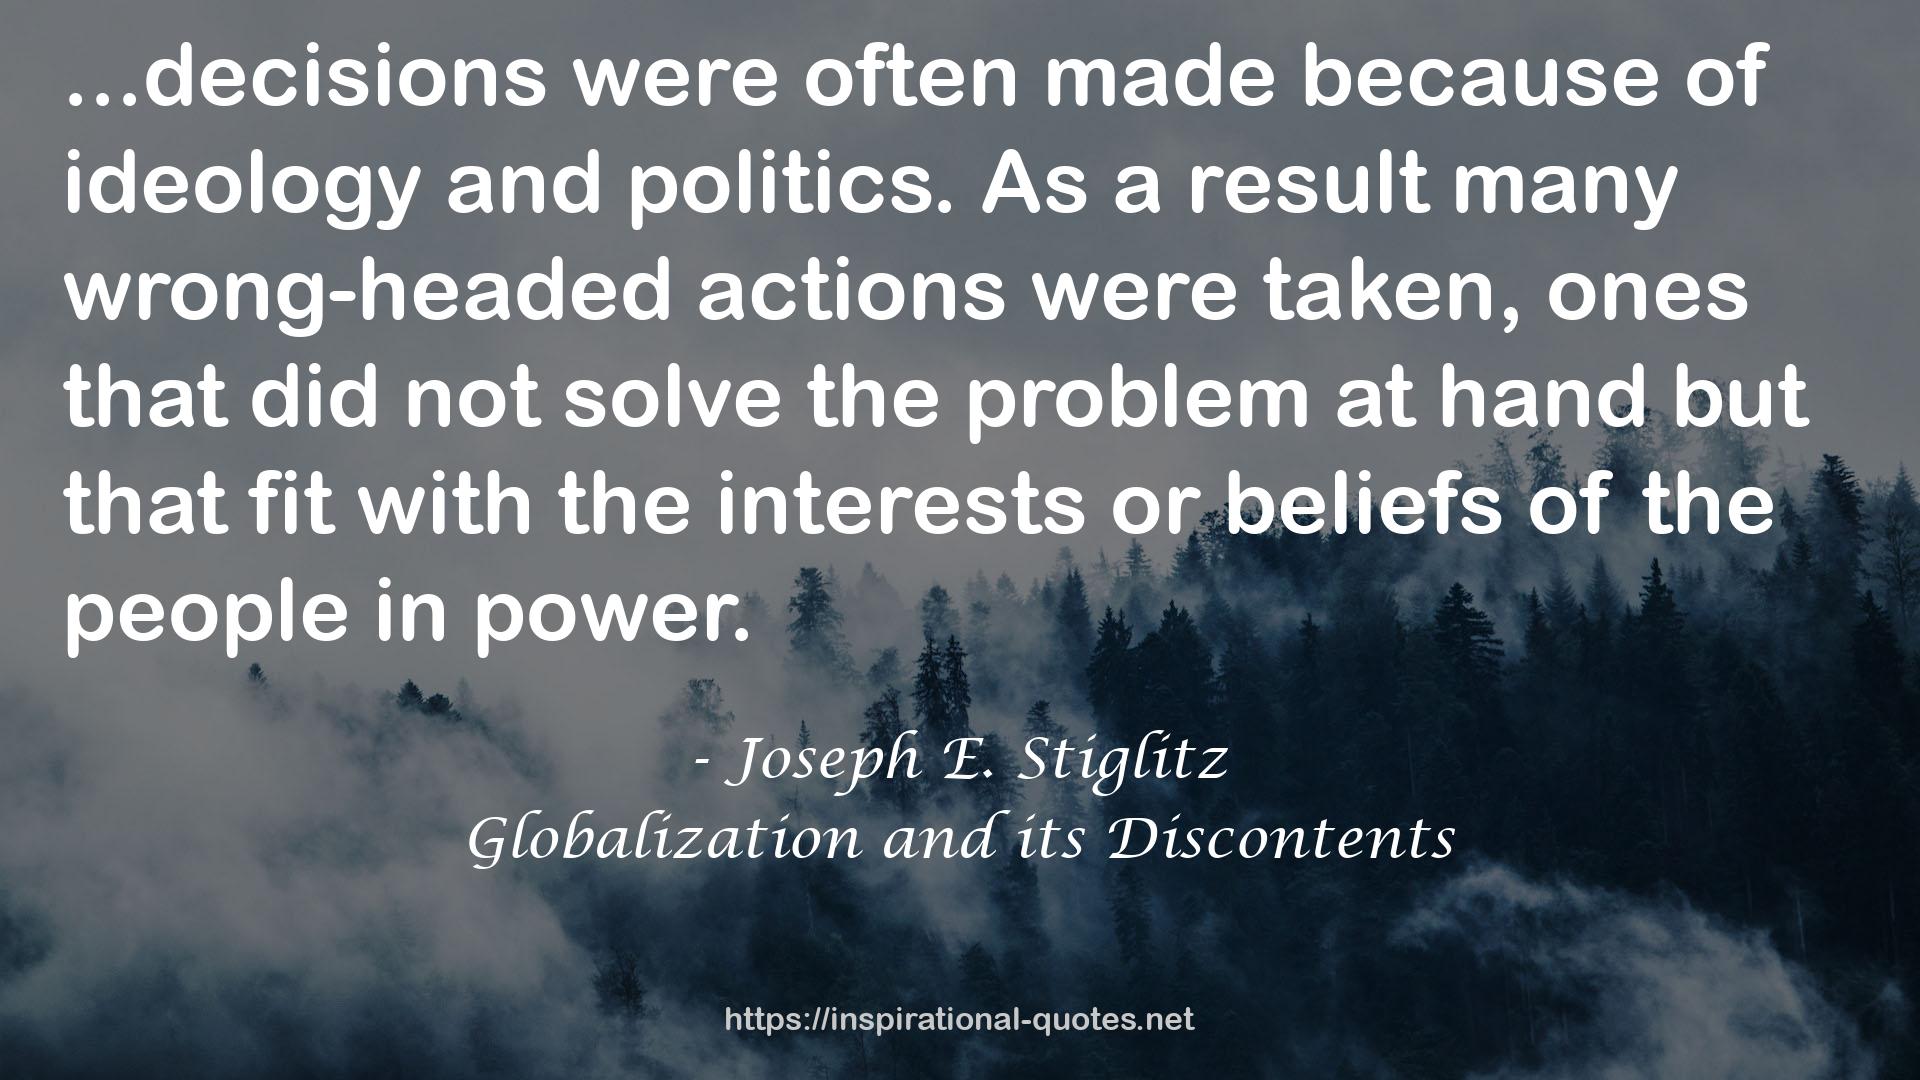 Globalization and its Discontents QUOTES